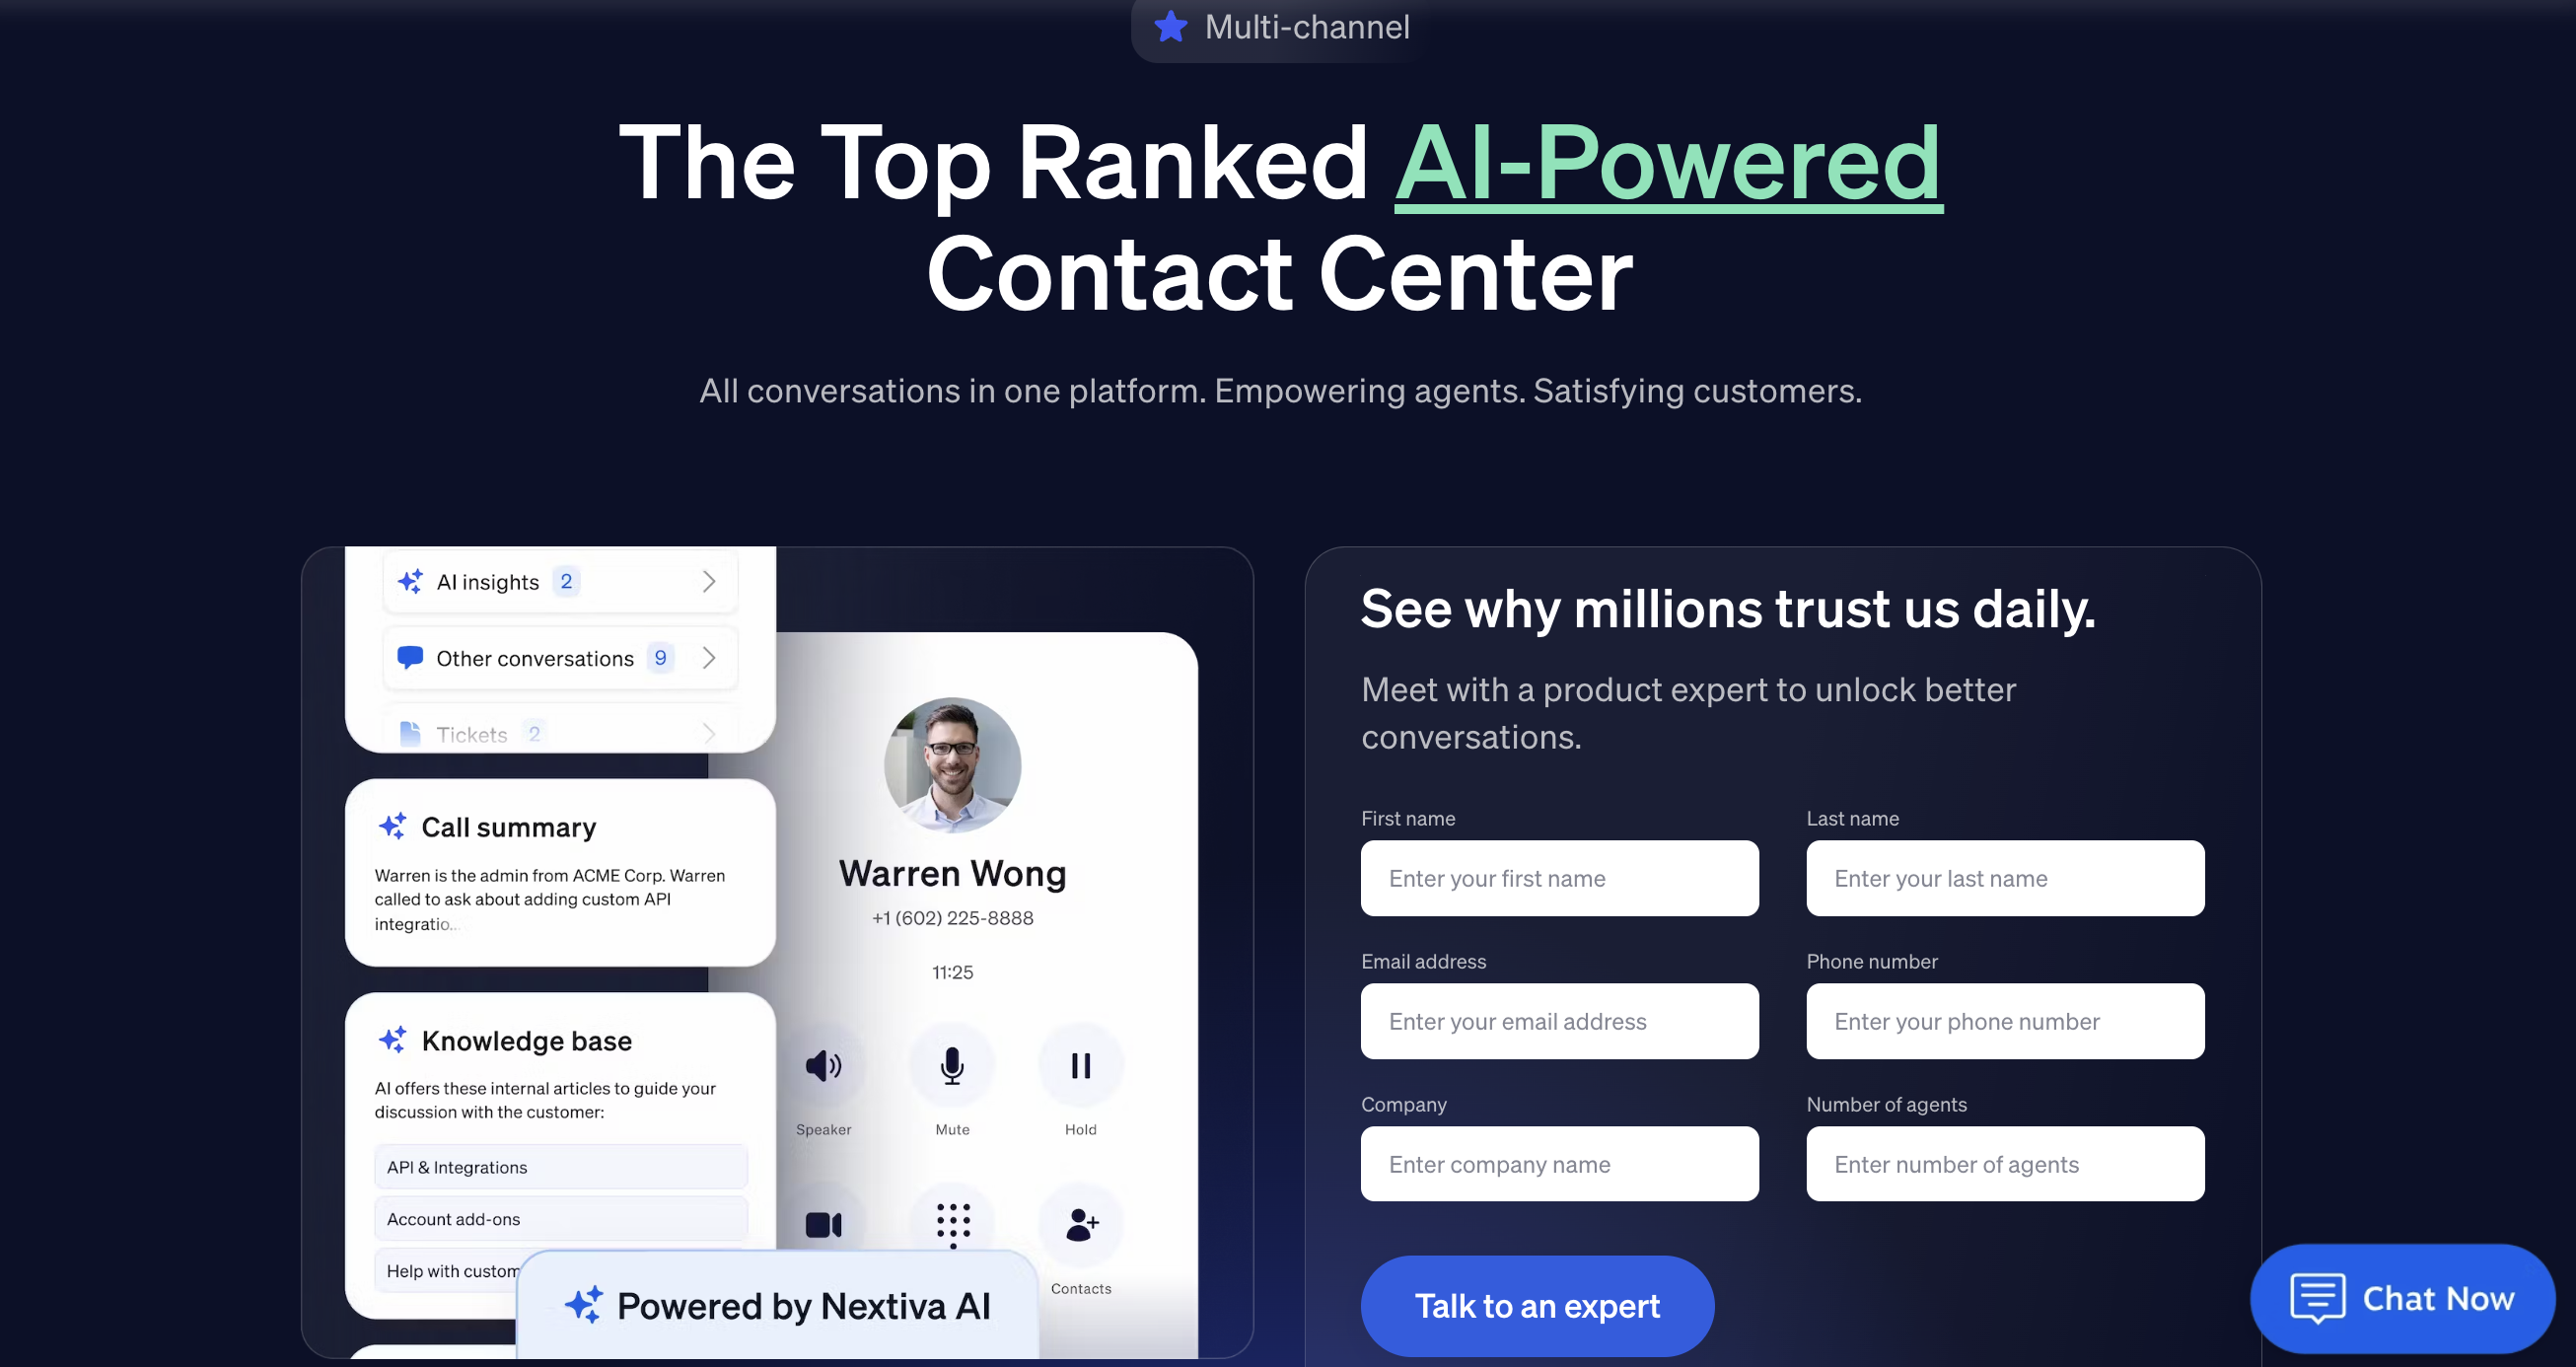 Nextiva-acquired-leading-contact-center-platform-Thrio-to-bring-AI-powered-contact-center-functionality-to-its-offering